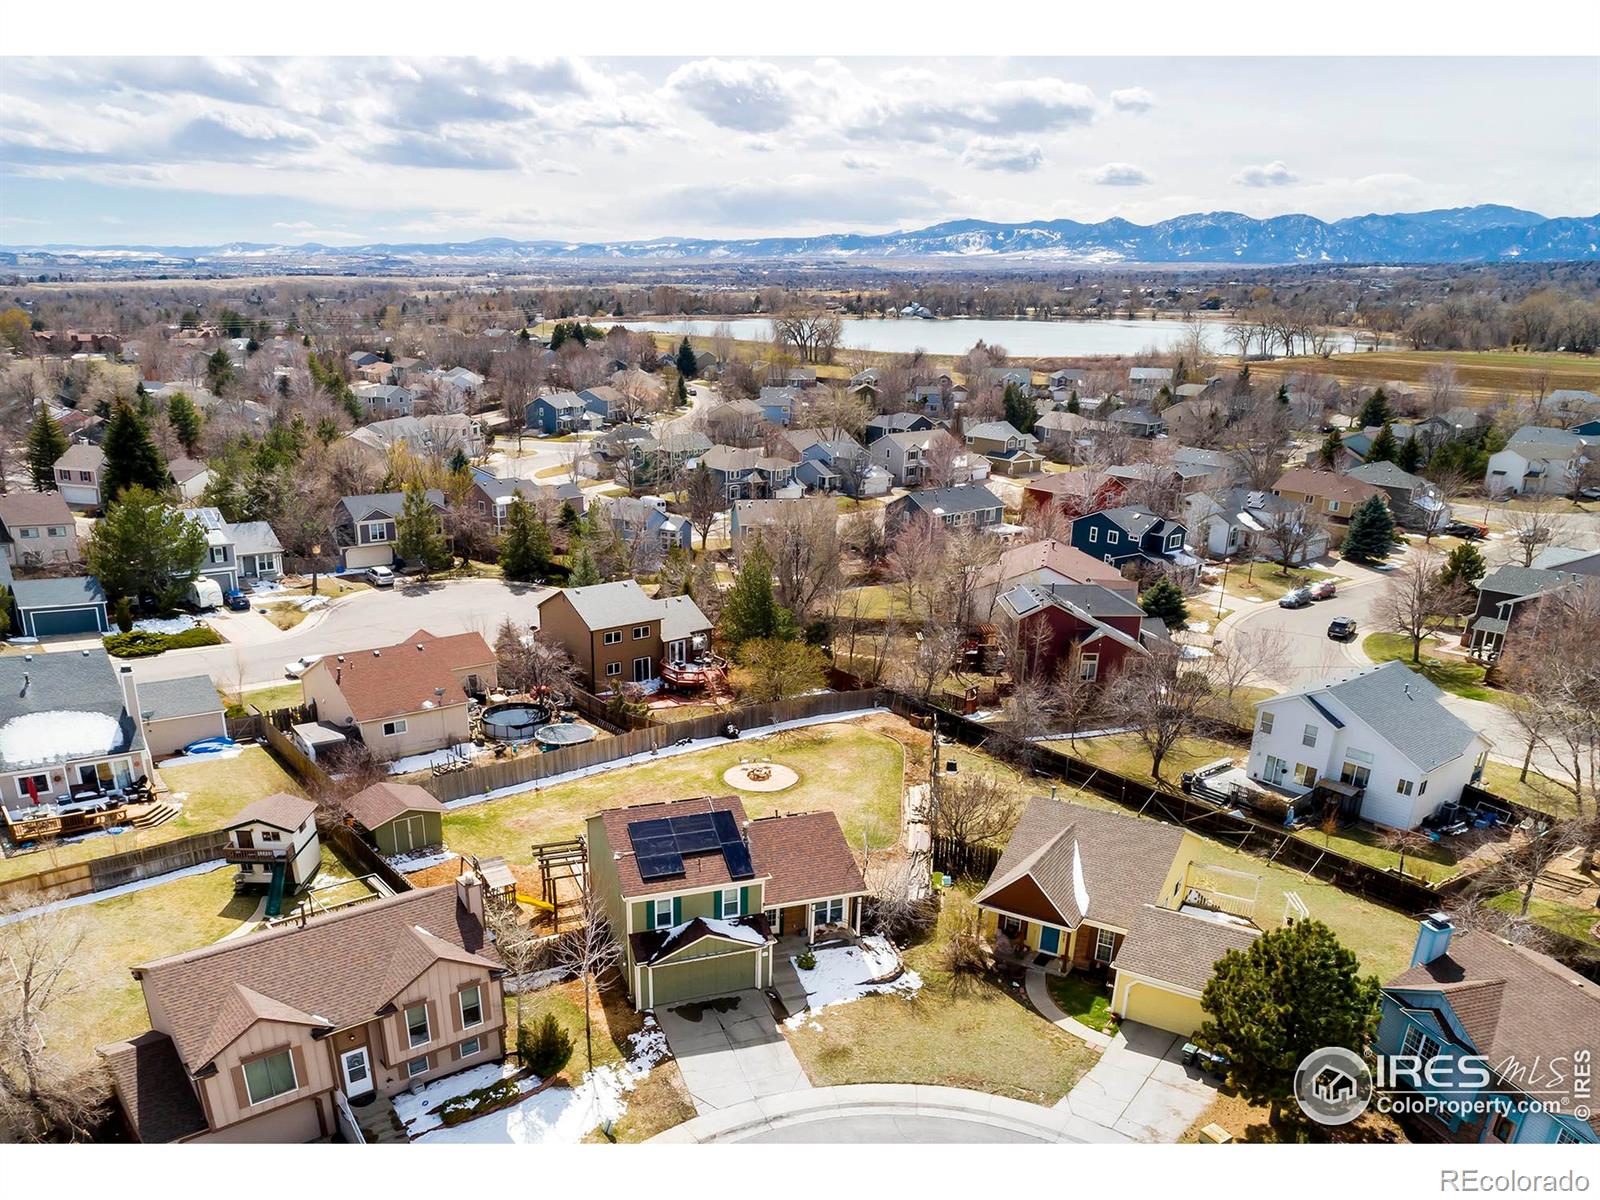 Report Image for 215 W Cornwall Court,Lafayette, Colorado